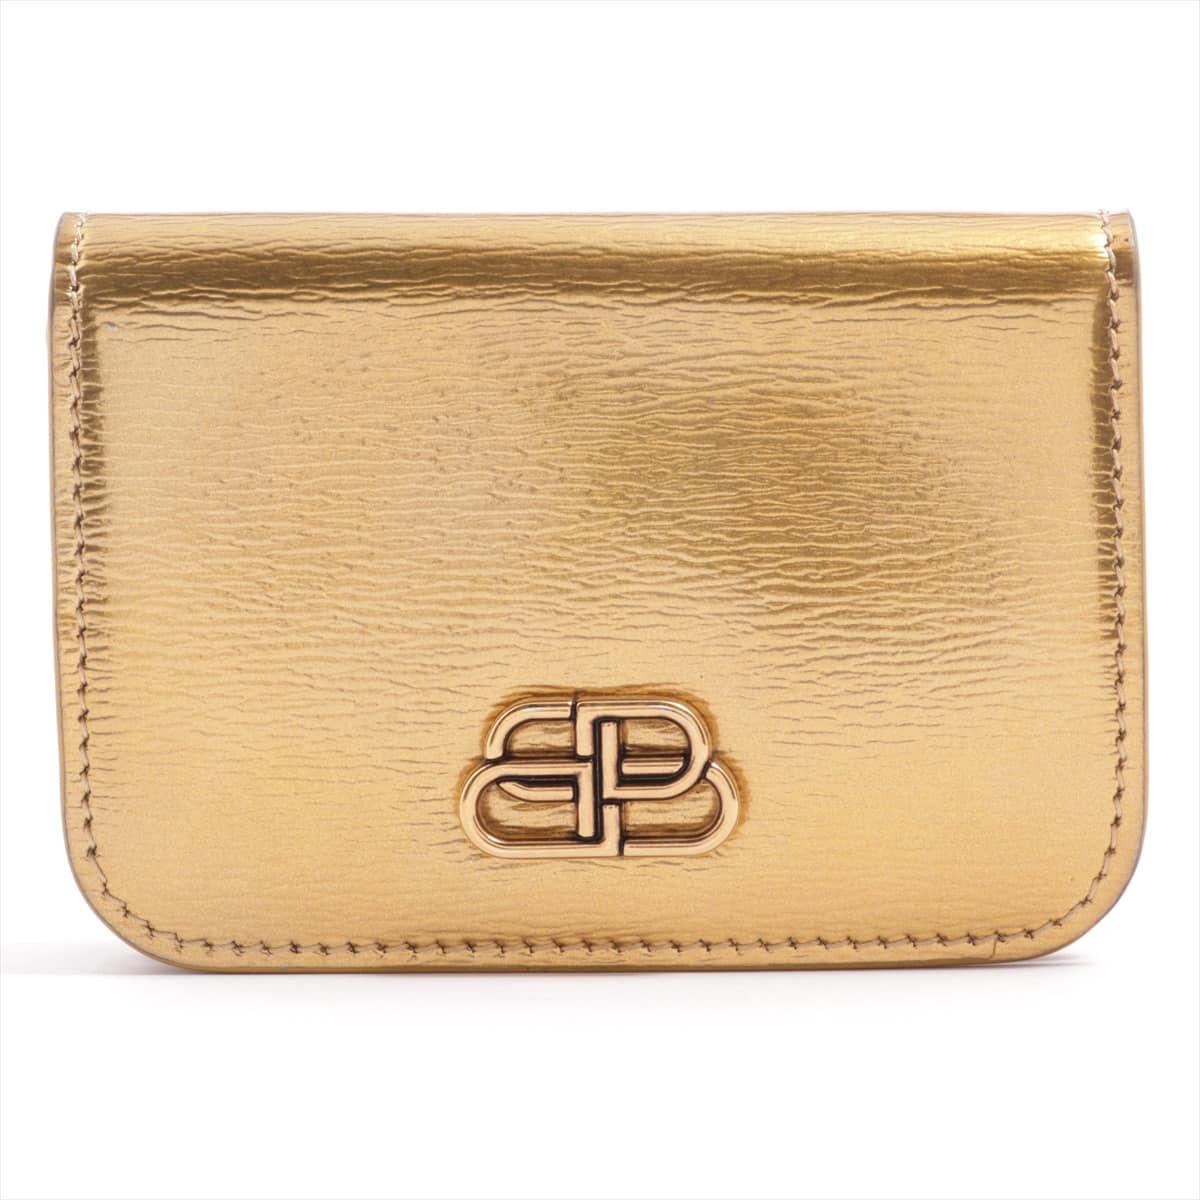 Balenciaga 601387 Patent leather Compact Wallet Gold